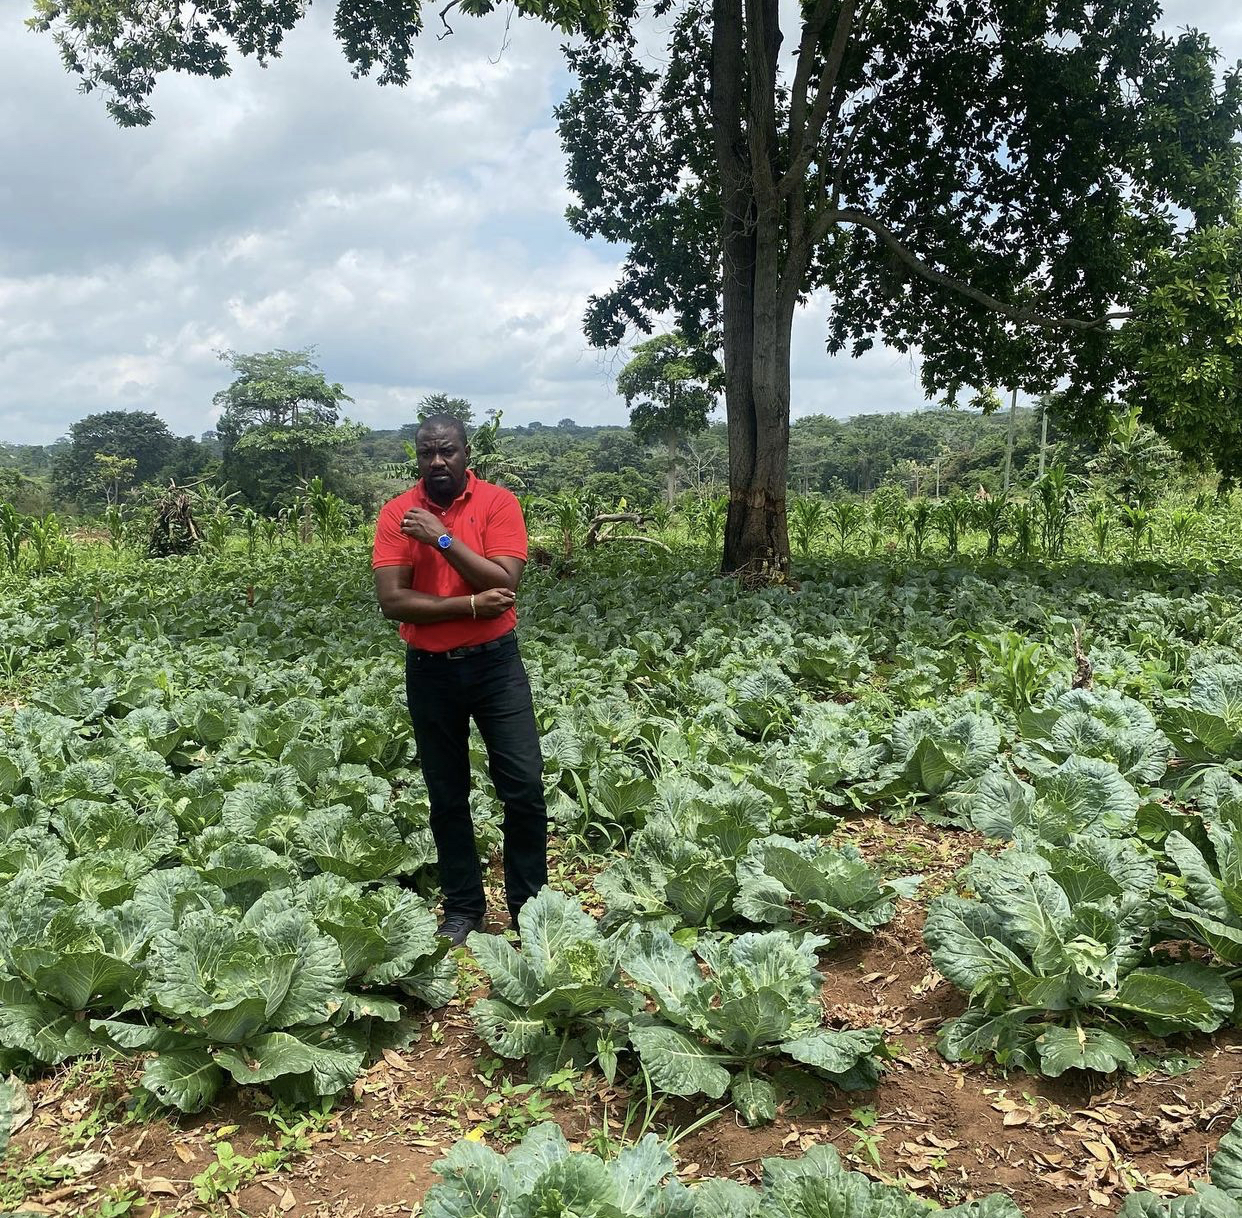 John Dumelo is one actor who has picked interest in the agricultural sector and doing quite well in the business. The actor had revealed during an interview with a local newspaper